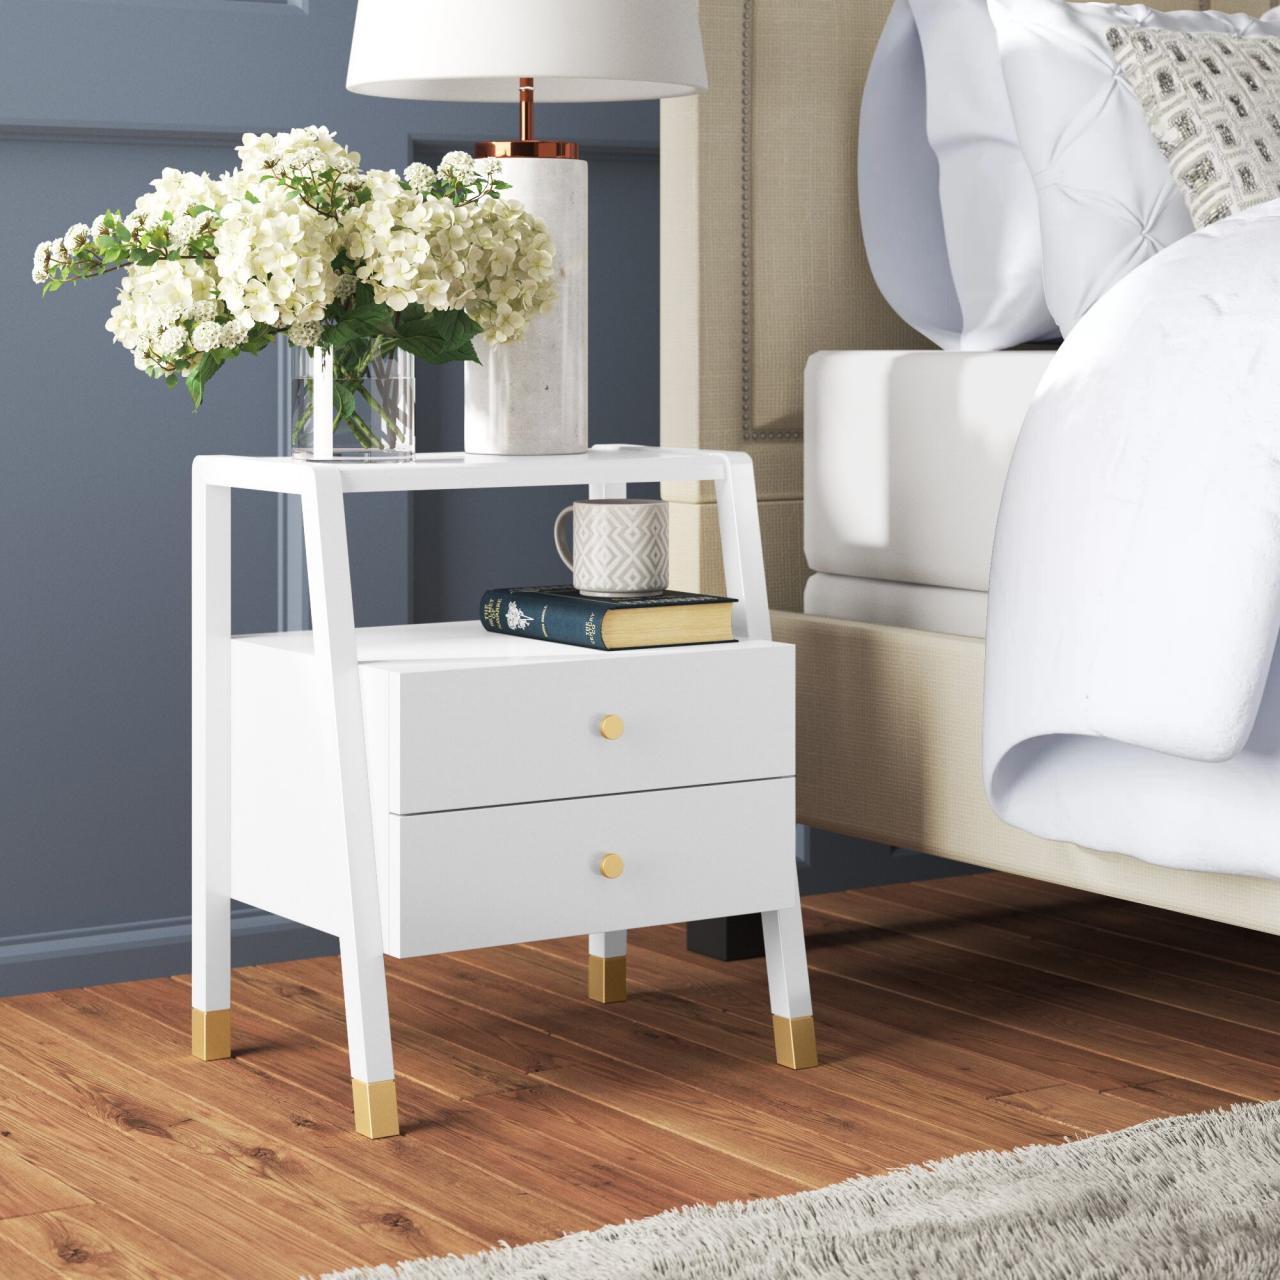 Simple-But-Clever Storage Solutions For Your Bedroom That's so Gemma